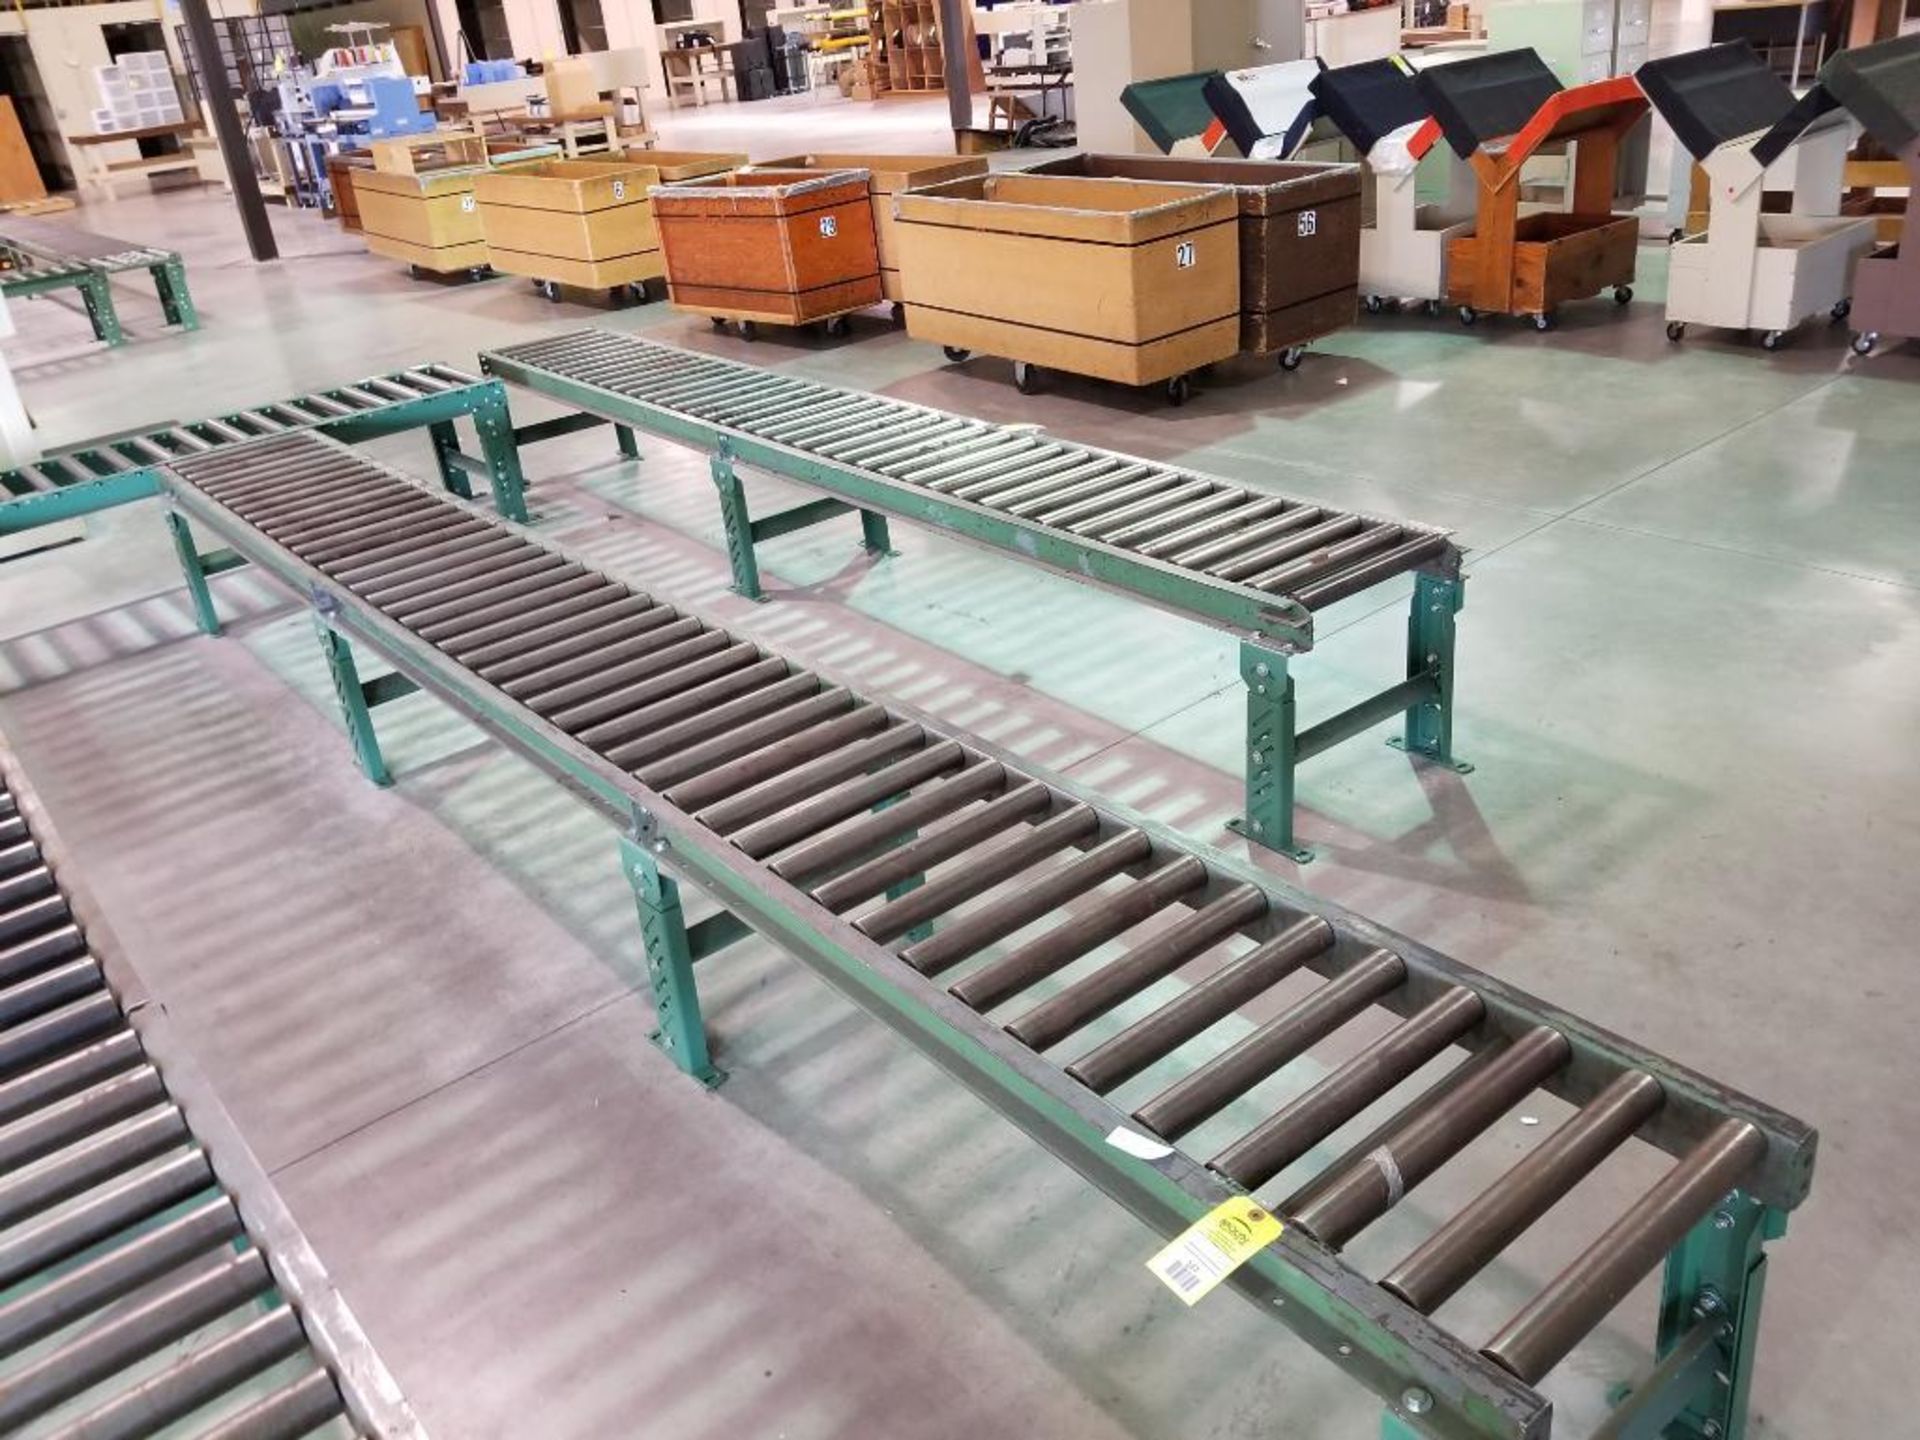 15ft roller conveyor section. 20in wide by 20in tall. (legs are adjustable to change height)